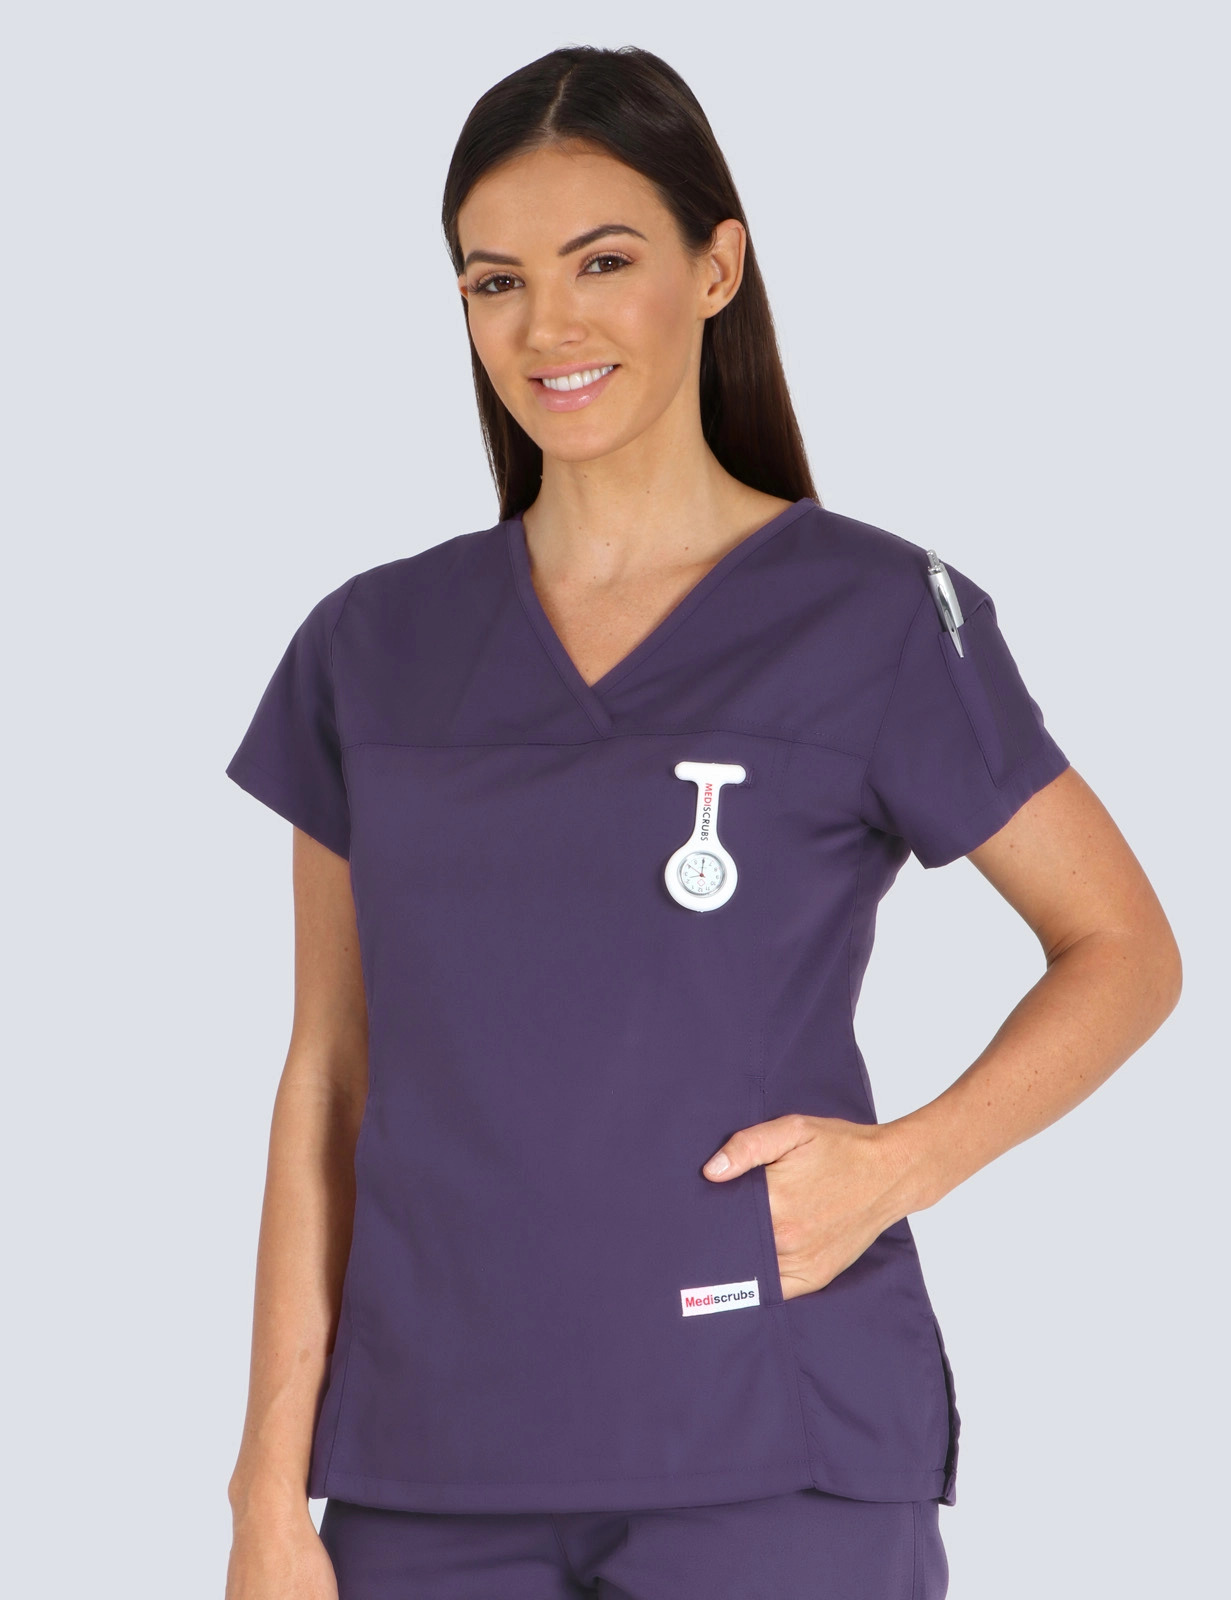 Southwest Healthcare - Women's Fit Solid Top in Aubergine